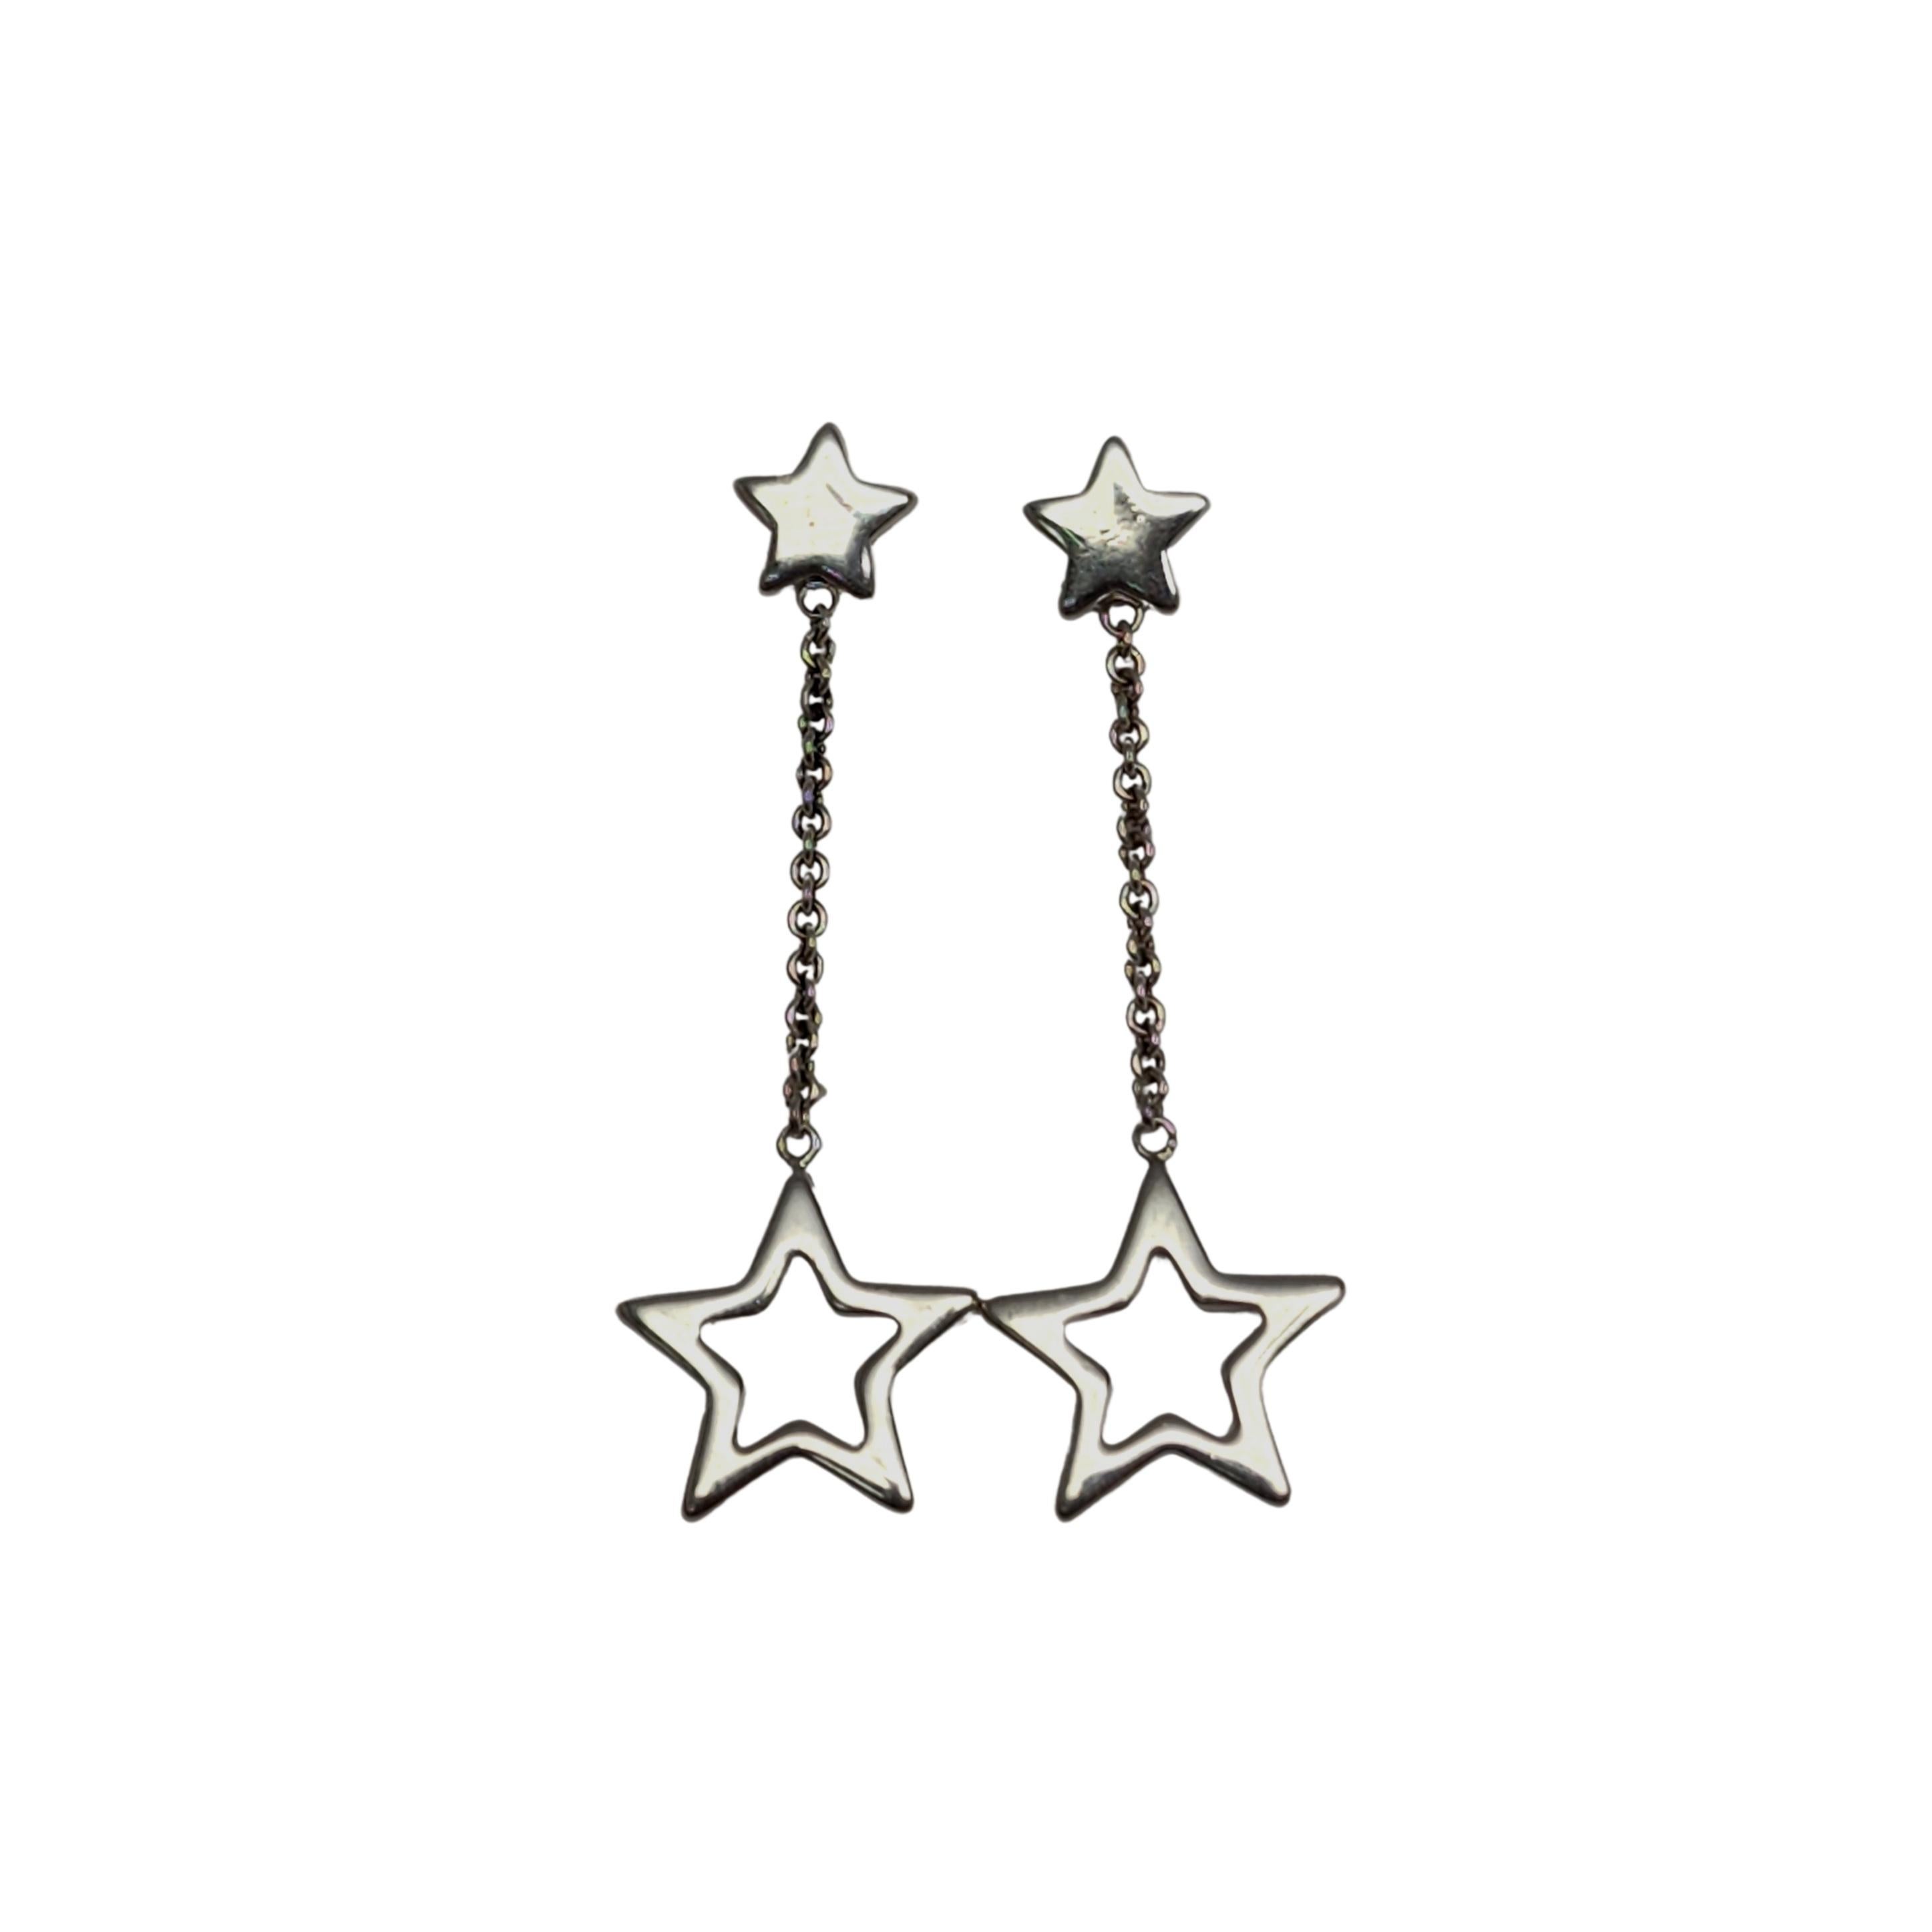 Sterling silver dangle star by Tiffany & Co.

Authentic Tiffany earrings features a small star with a chain hanging from it dangling another cut-out star. Back are not T&Co. Tiffany box and pouch are not included.

Measures approx 1 5/8